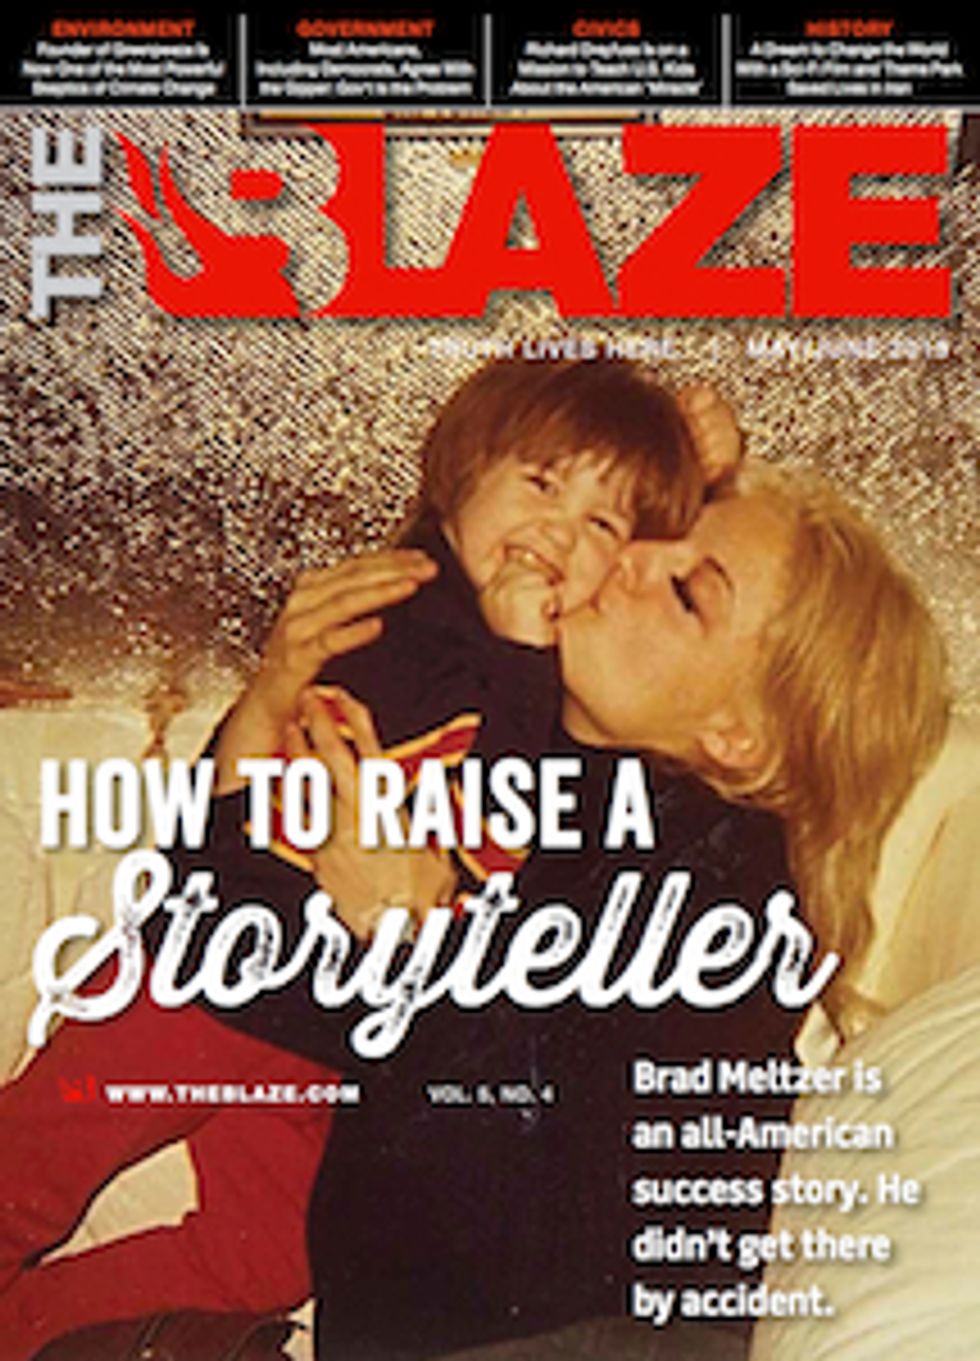 New Blaze Mag cover for May/June: A story of love and courage